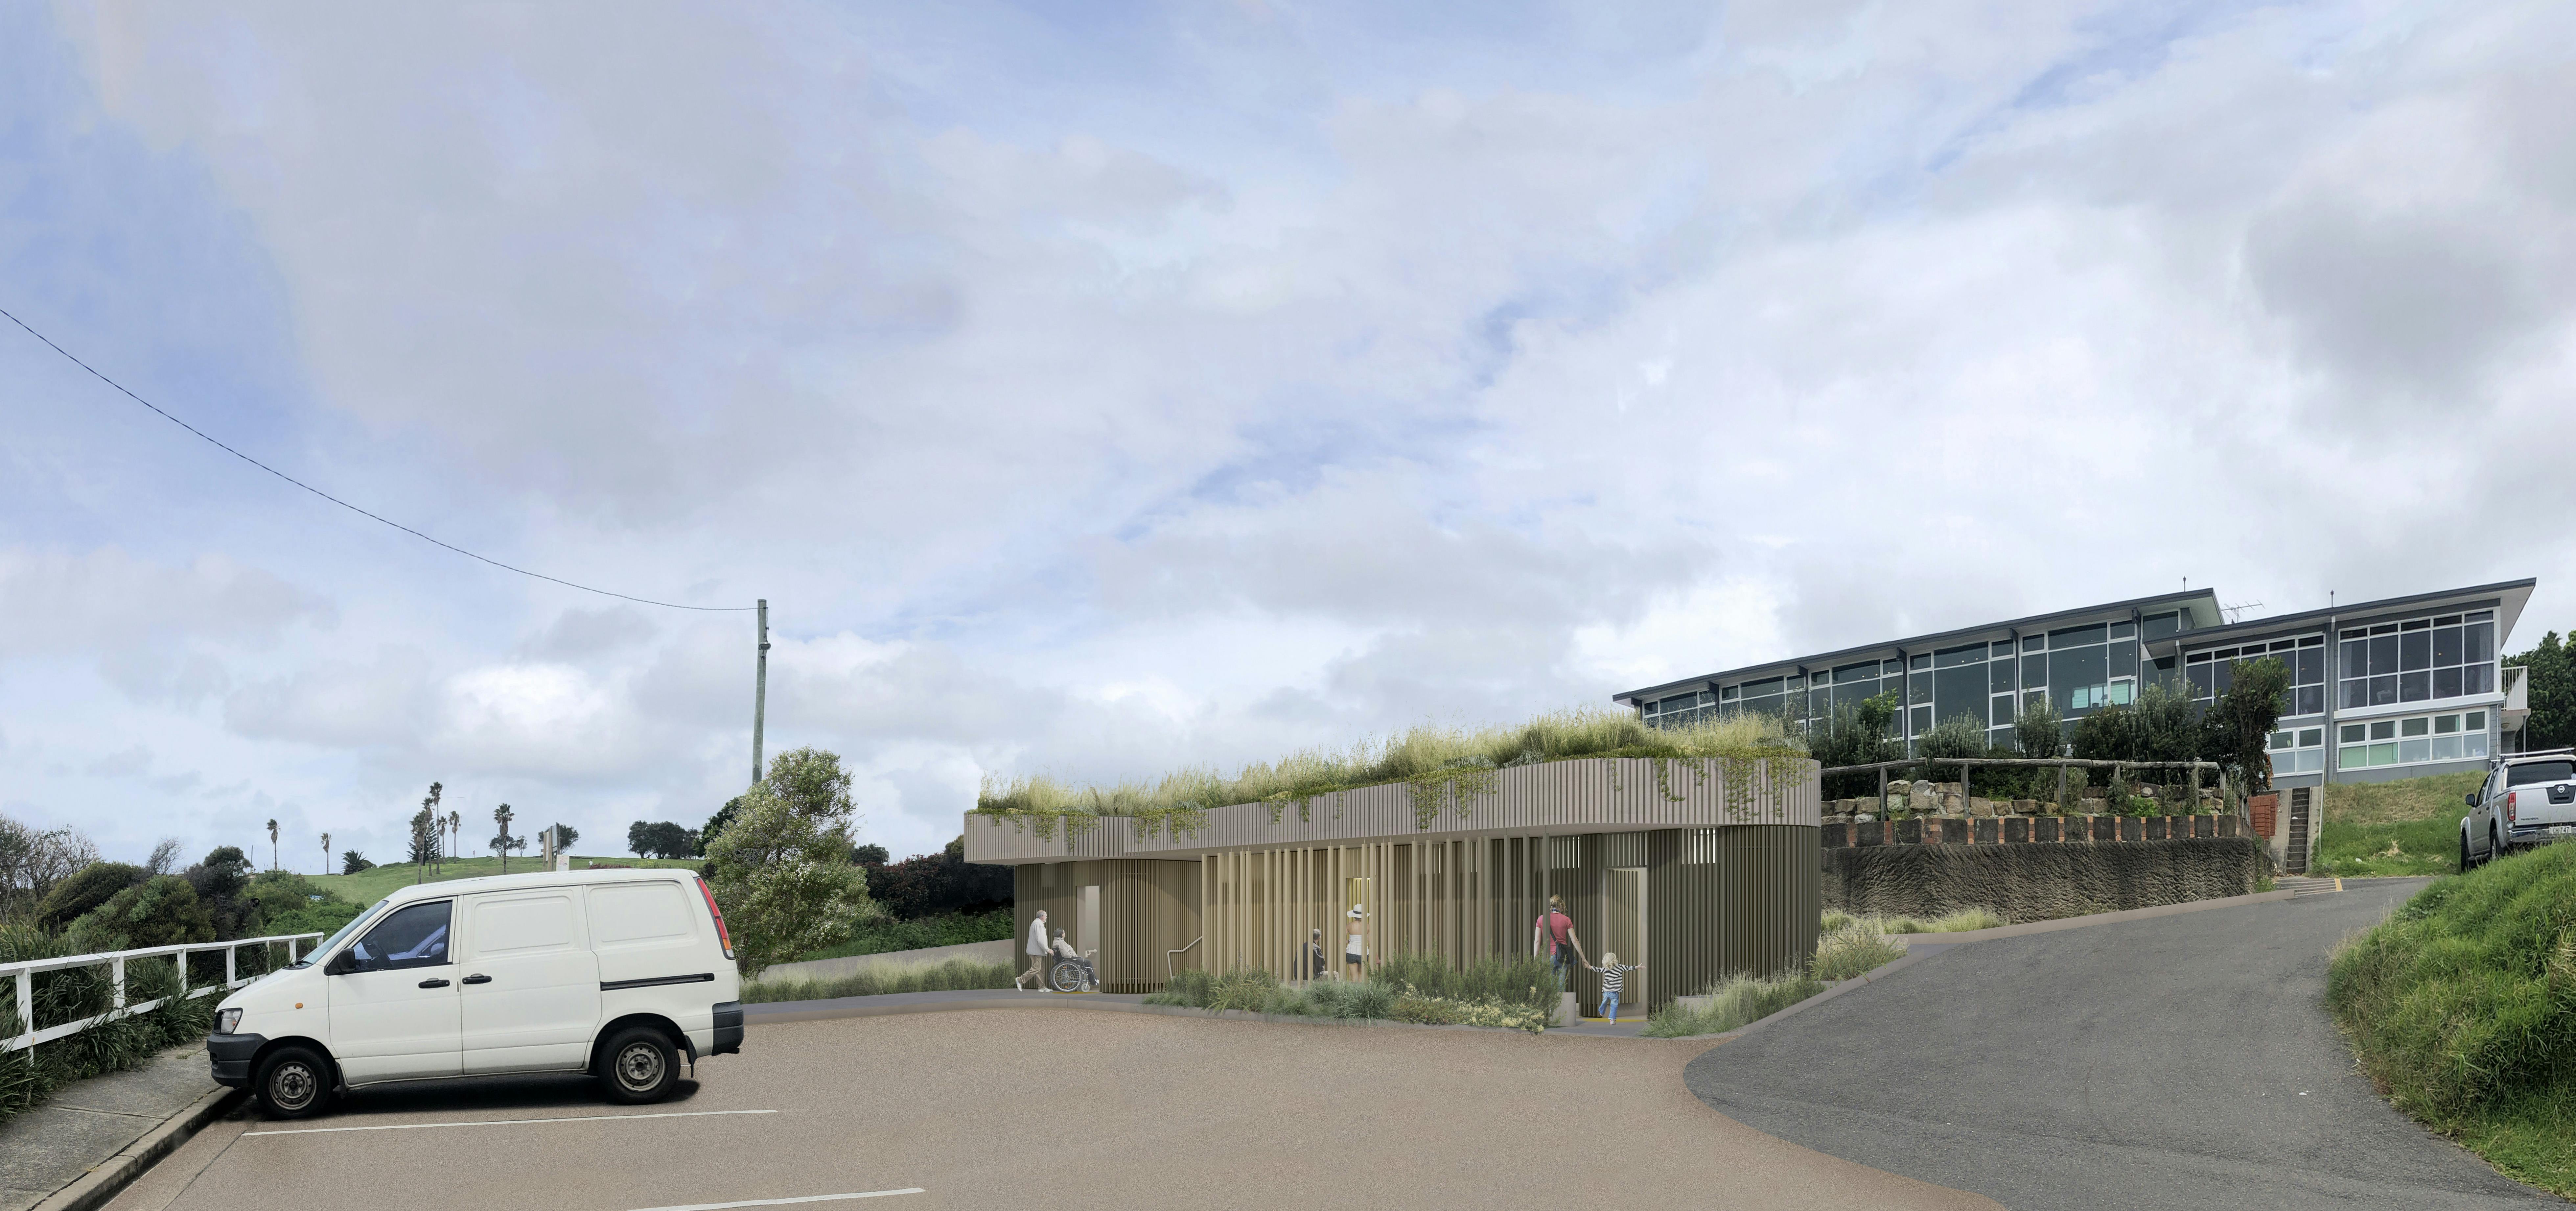 Artist impression of the proposed amenities building located in the car park.